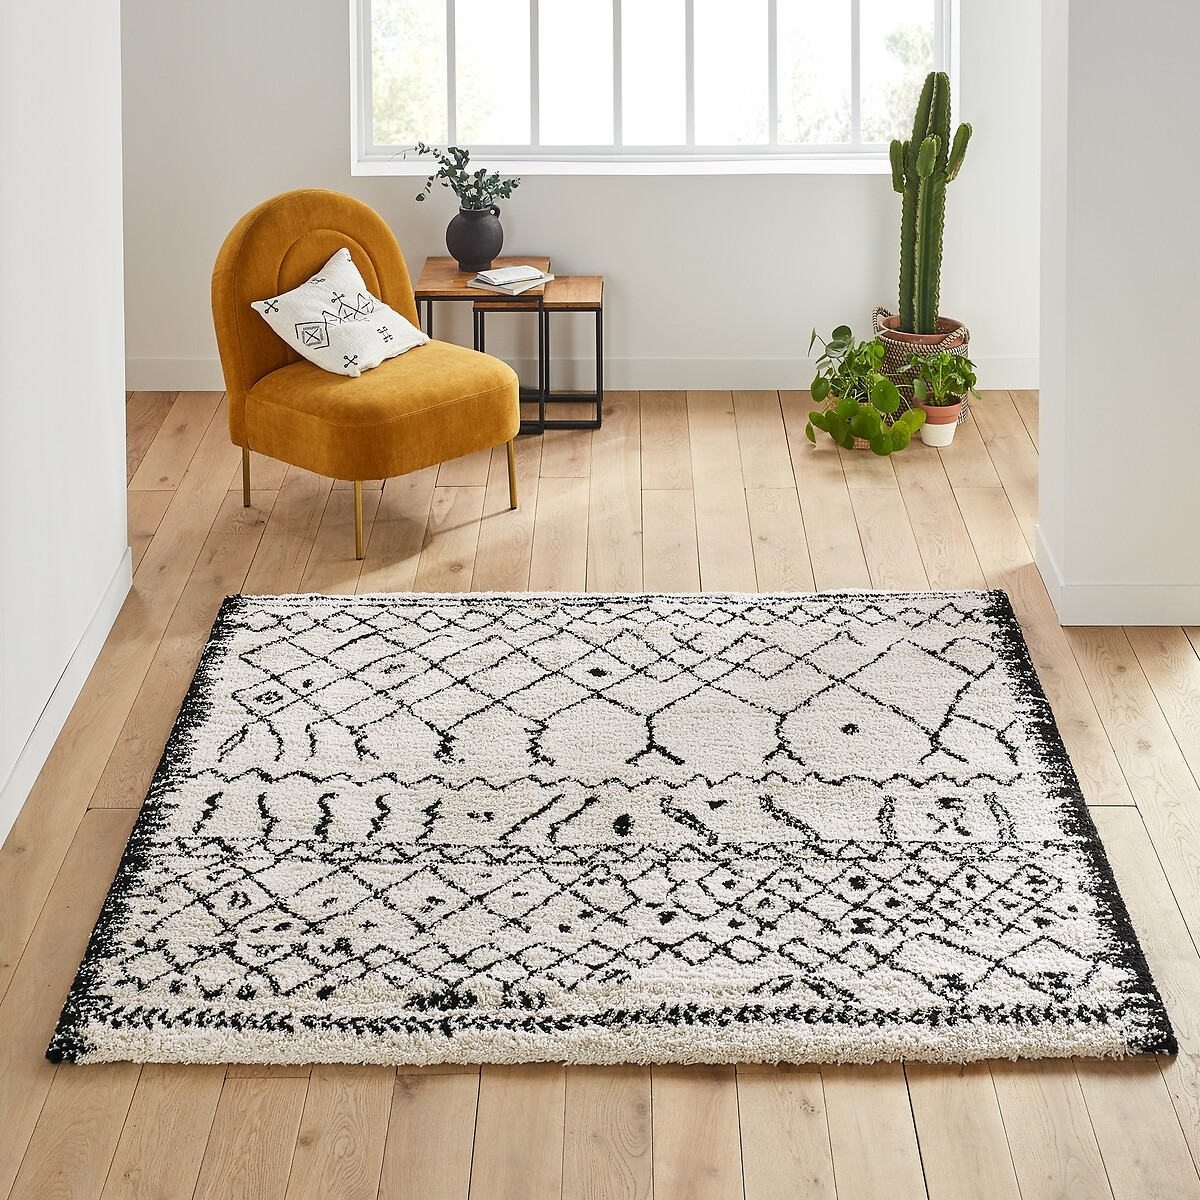 Afaw Square Berber-Style 100% Wool Rug - image 1